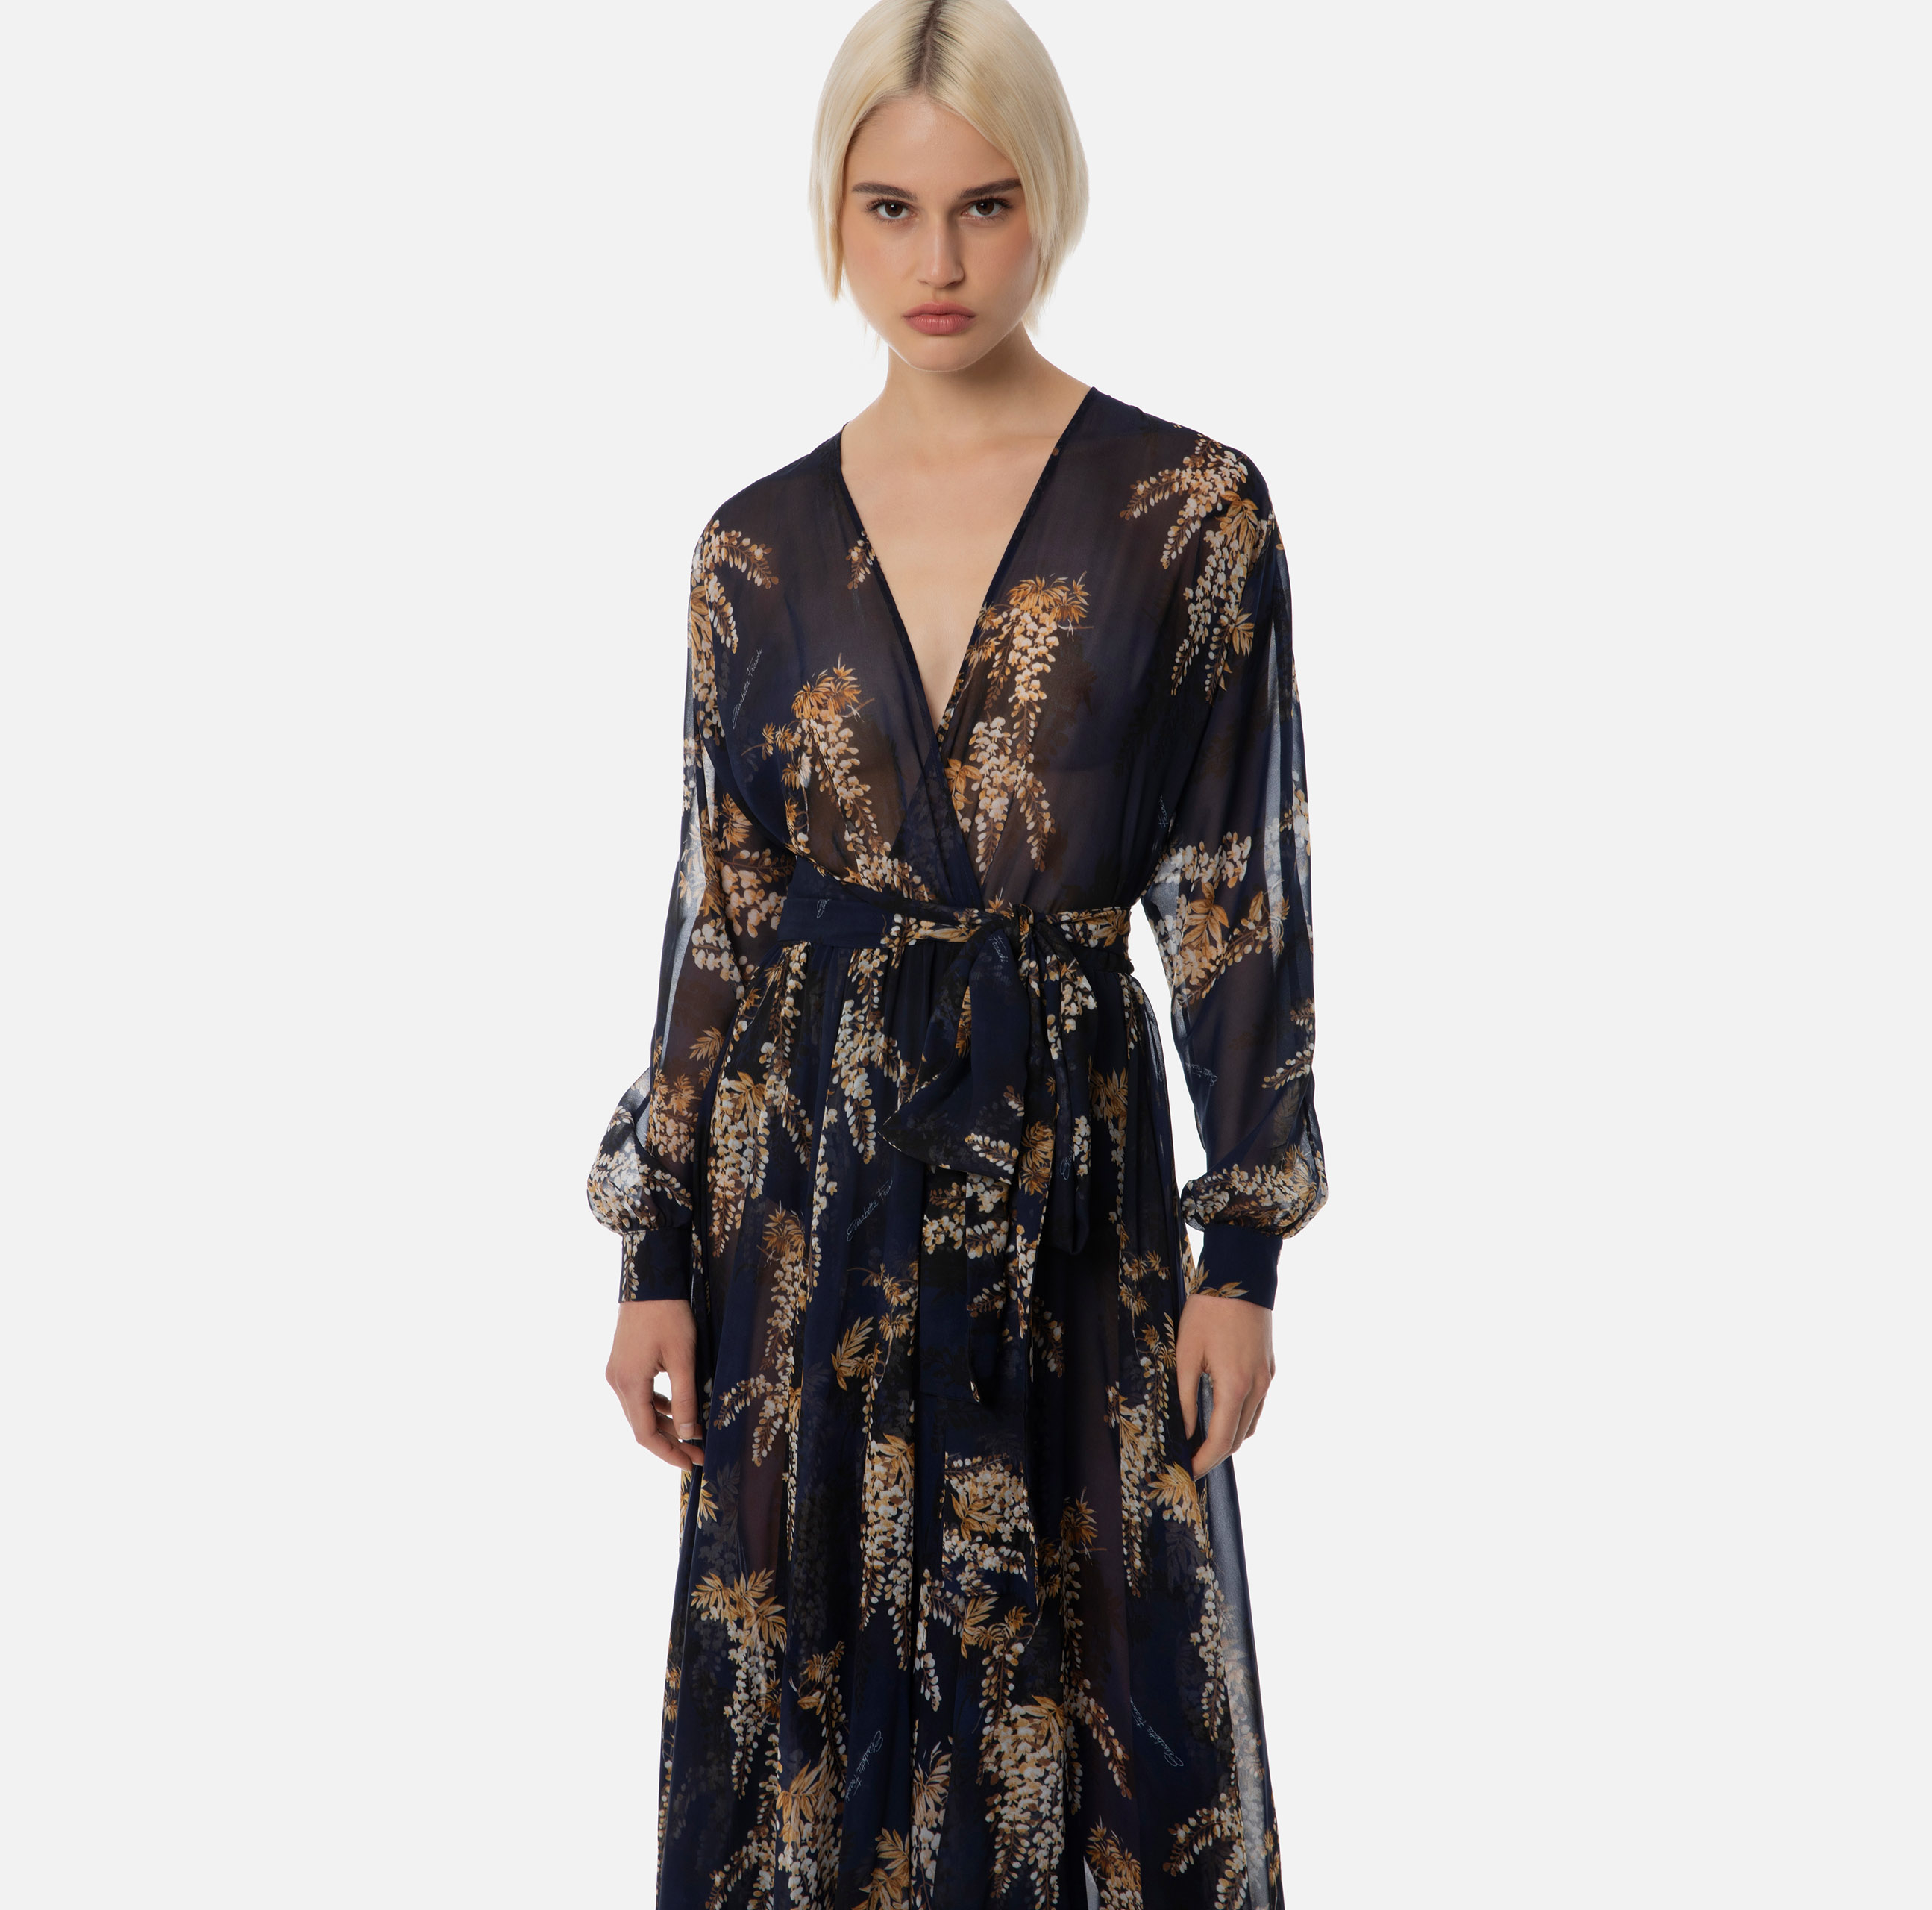 Red Carpet dress made of voile with floral print - Elisabetta Franchi